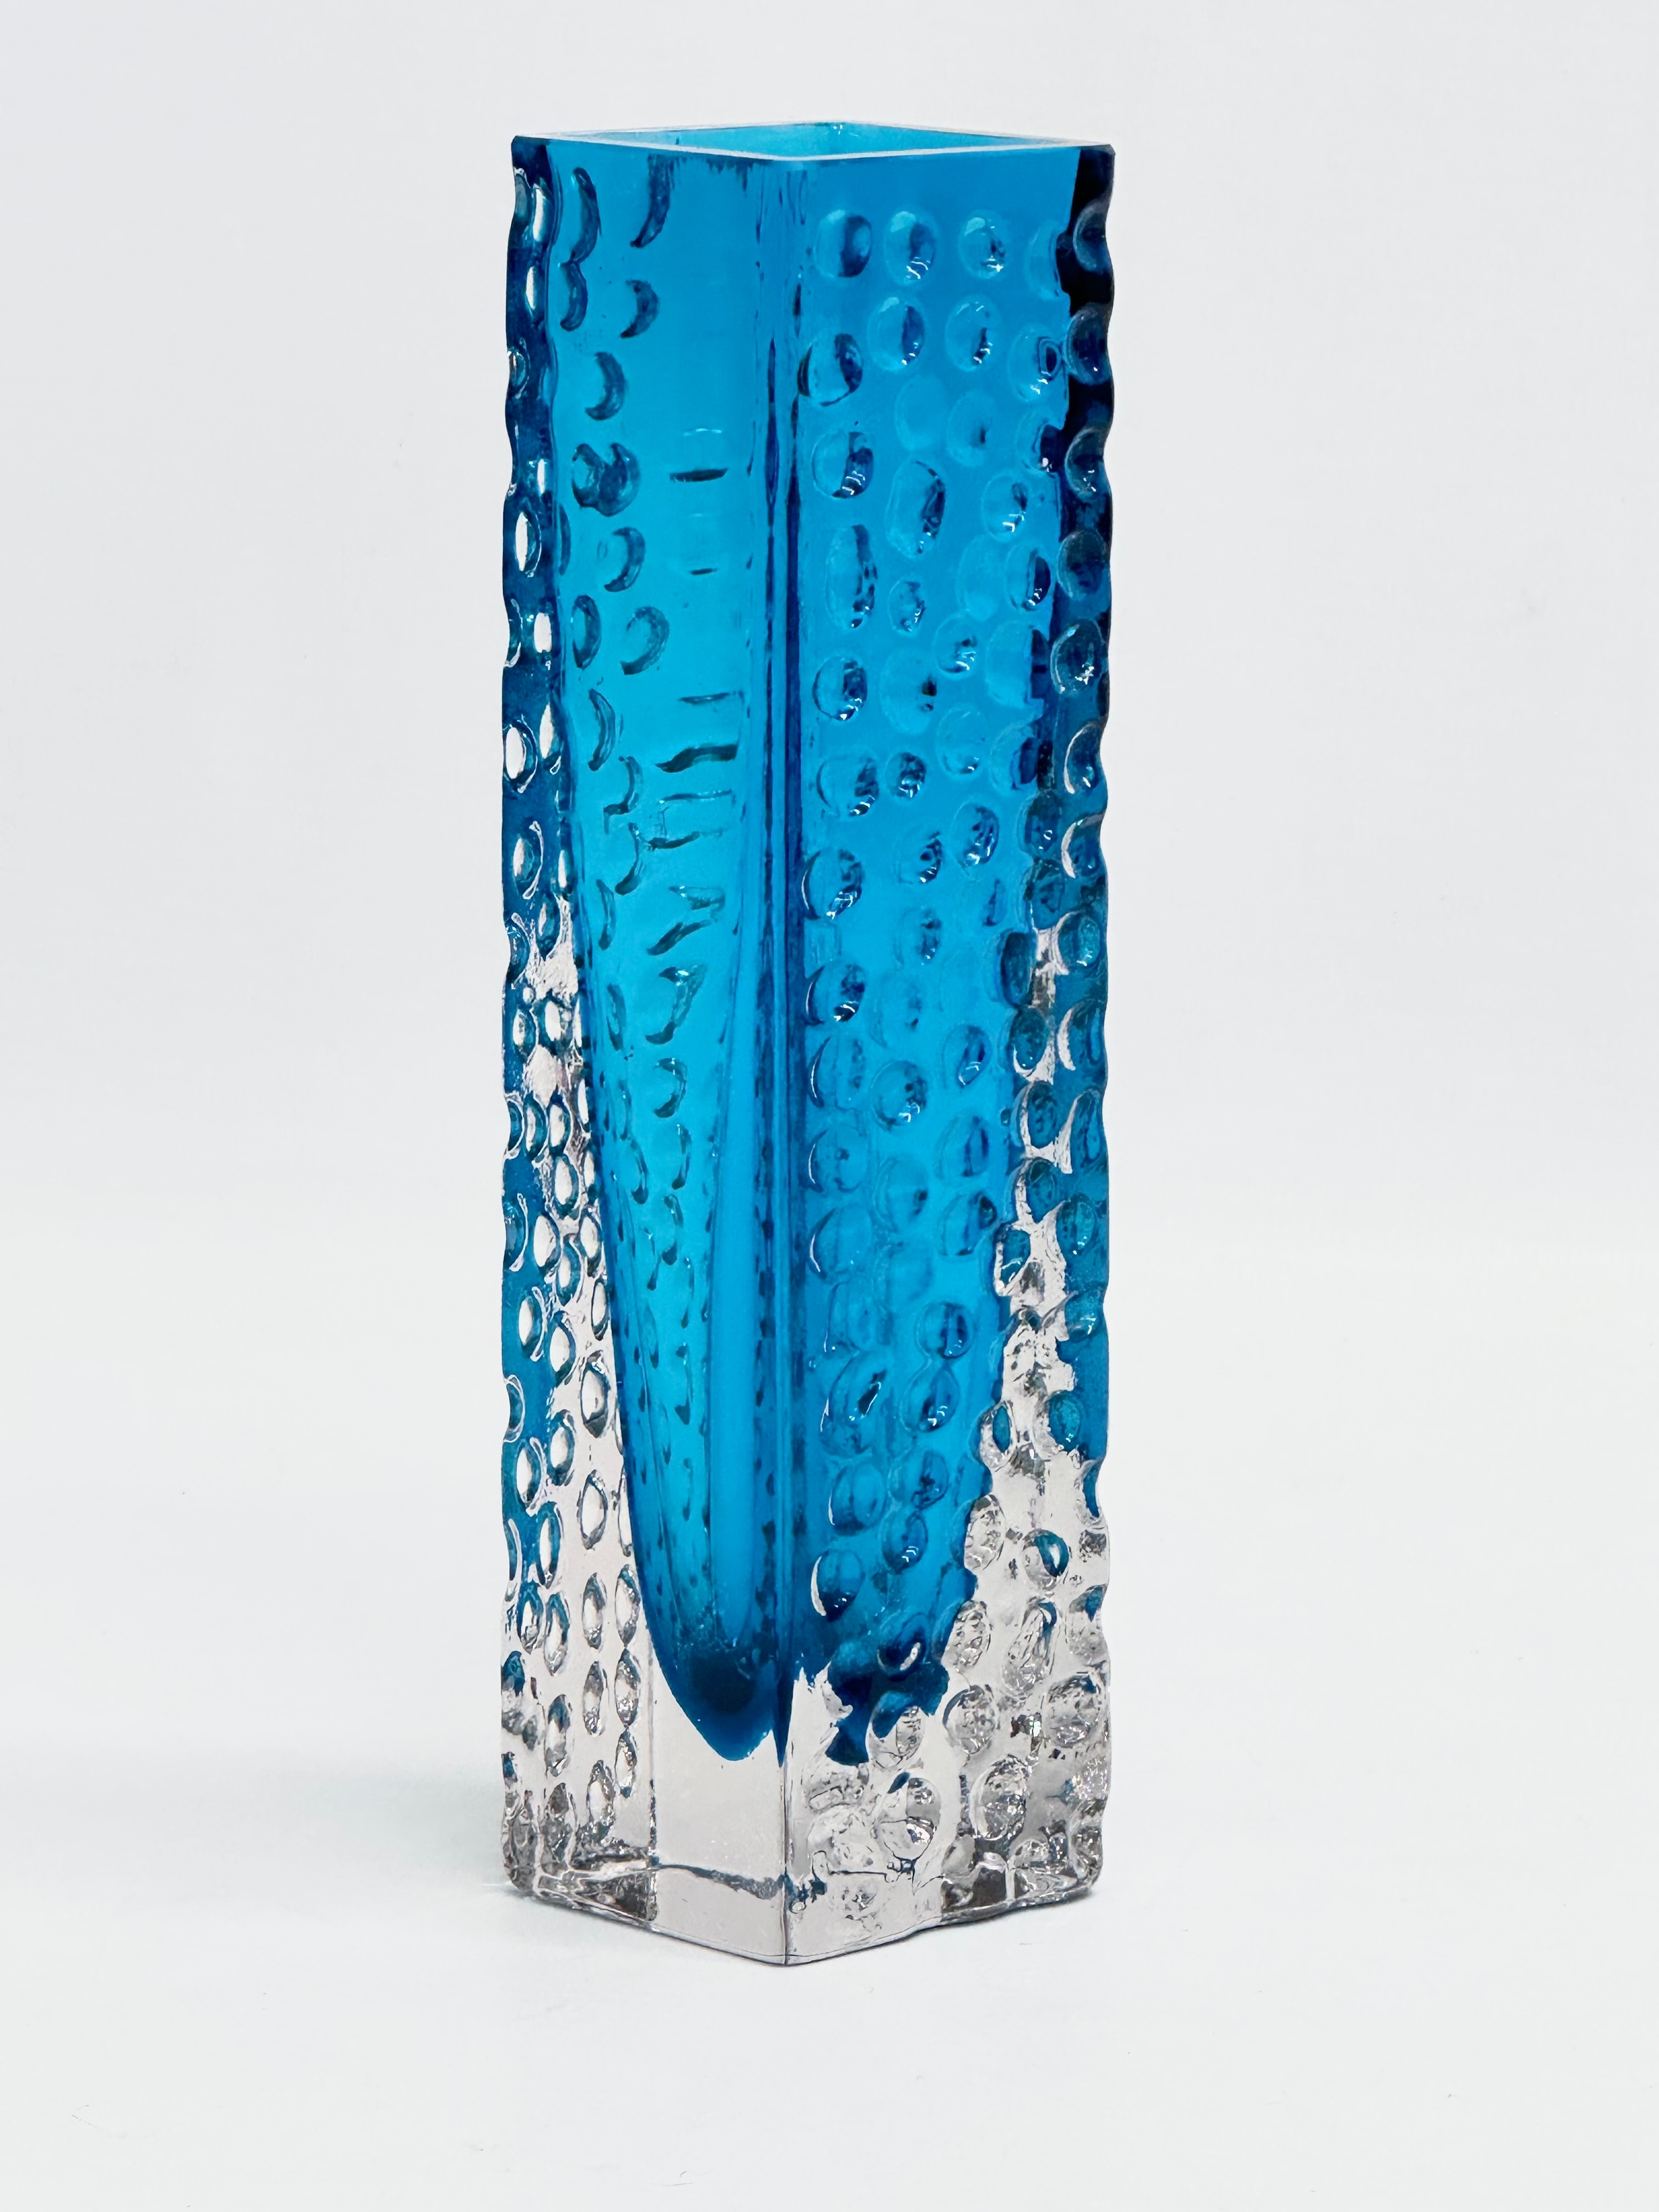 A Kingfisher Blue ‘Nailhead’ vase designed by Geoffrey Baxter for Whitefriars. 4.5x45.5x17cm. - Image 3 of 4